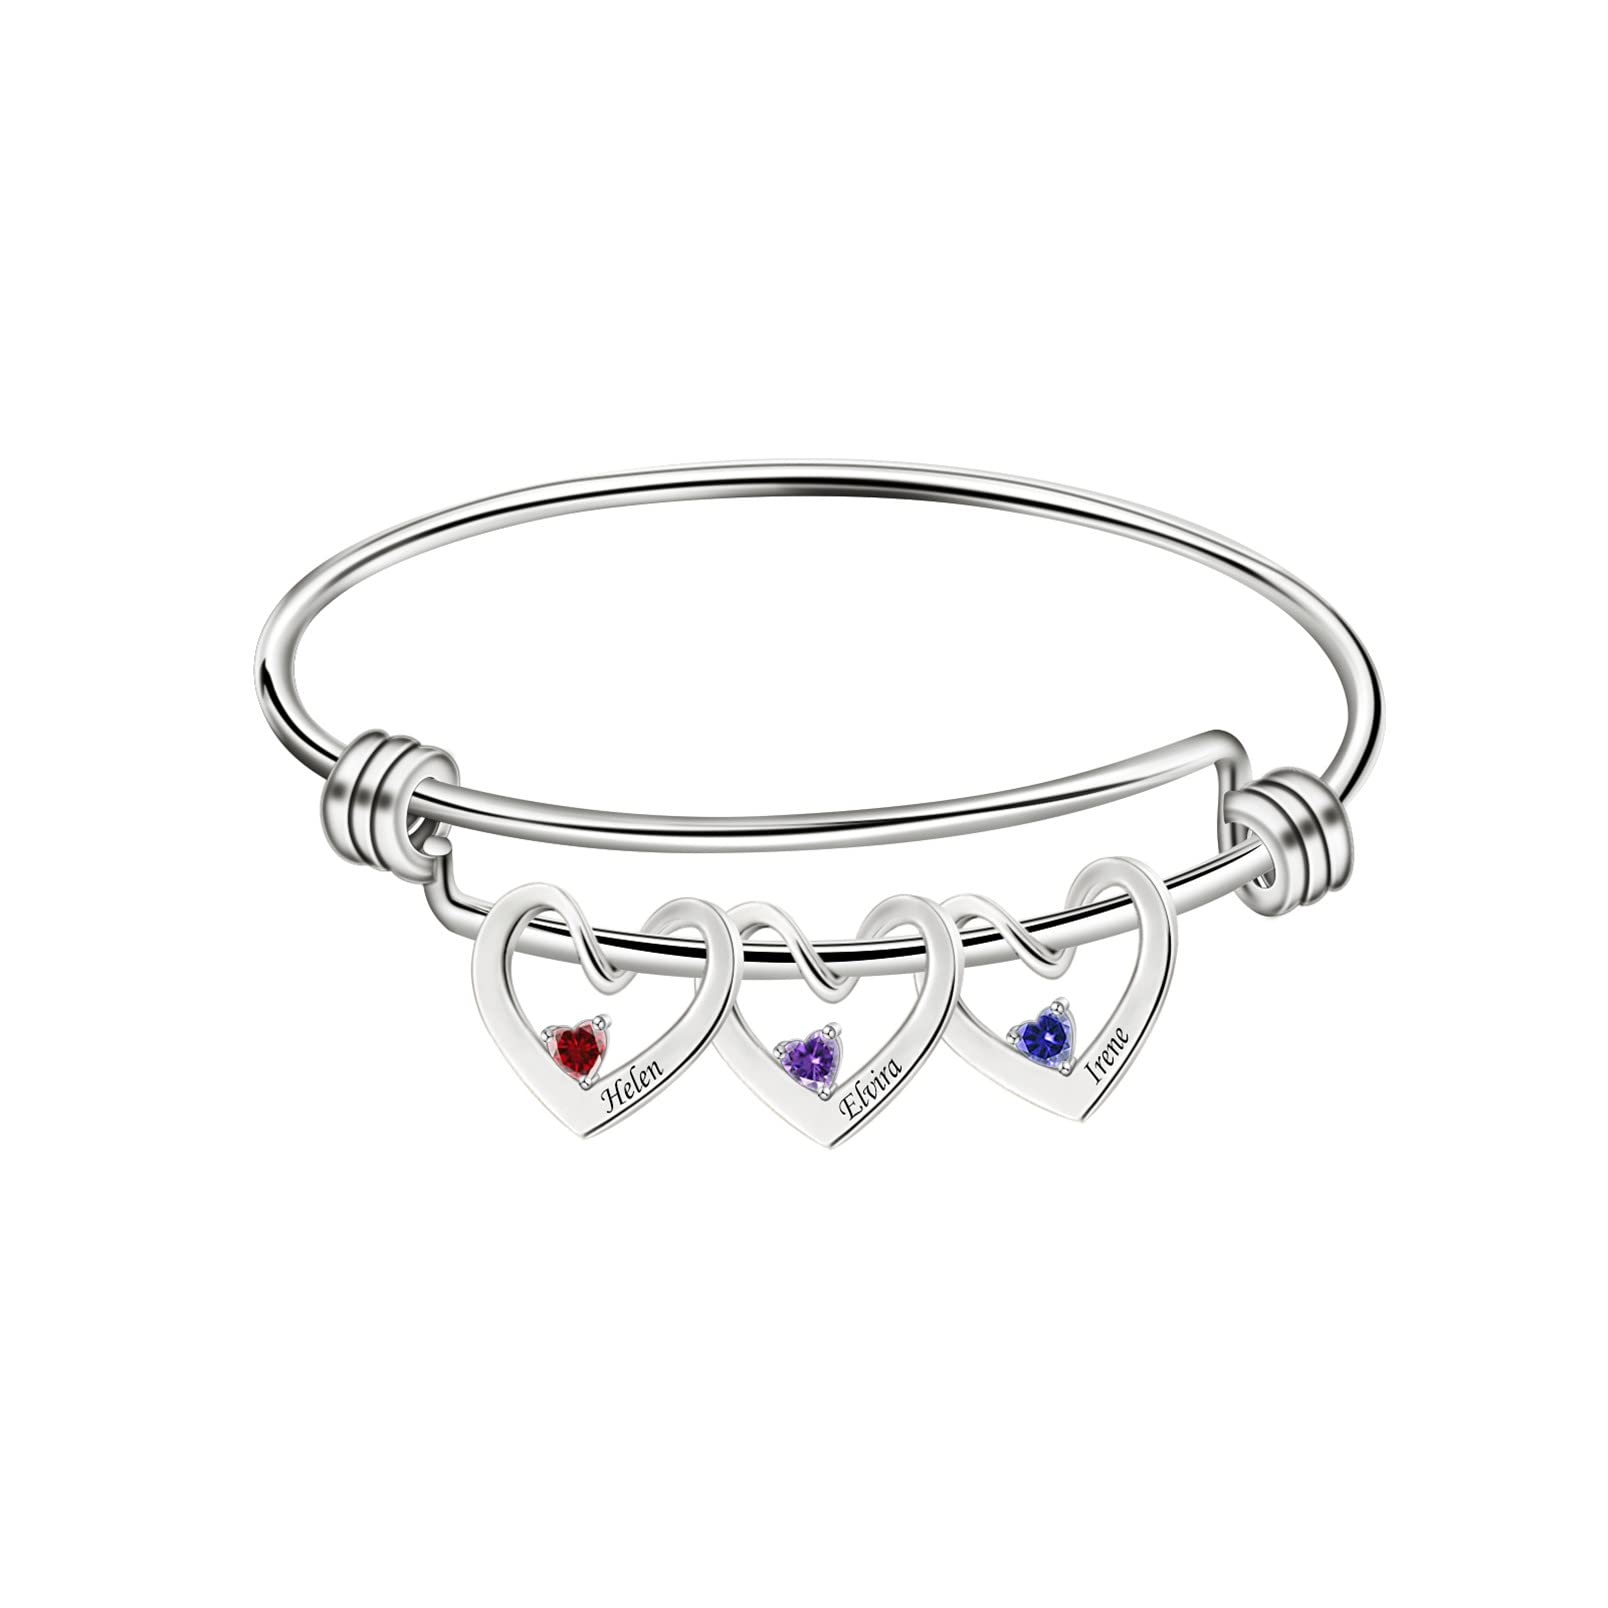 Personalized Adjustable Mother‘s Bracelet with 3 Heart Birthstones 